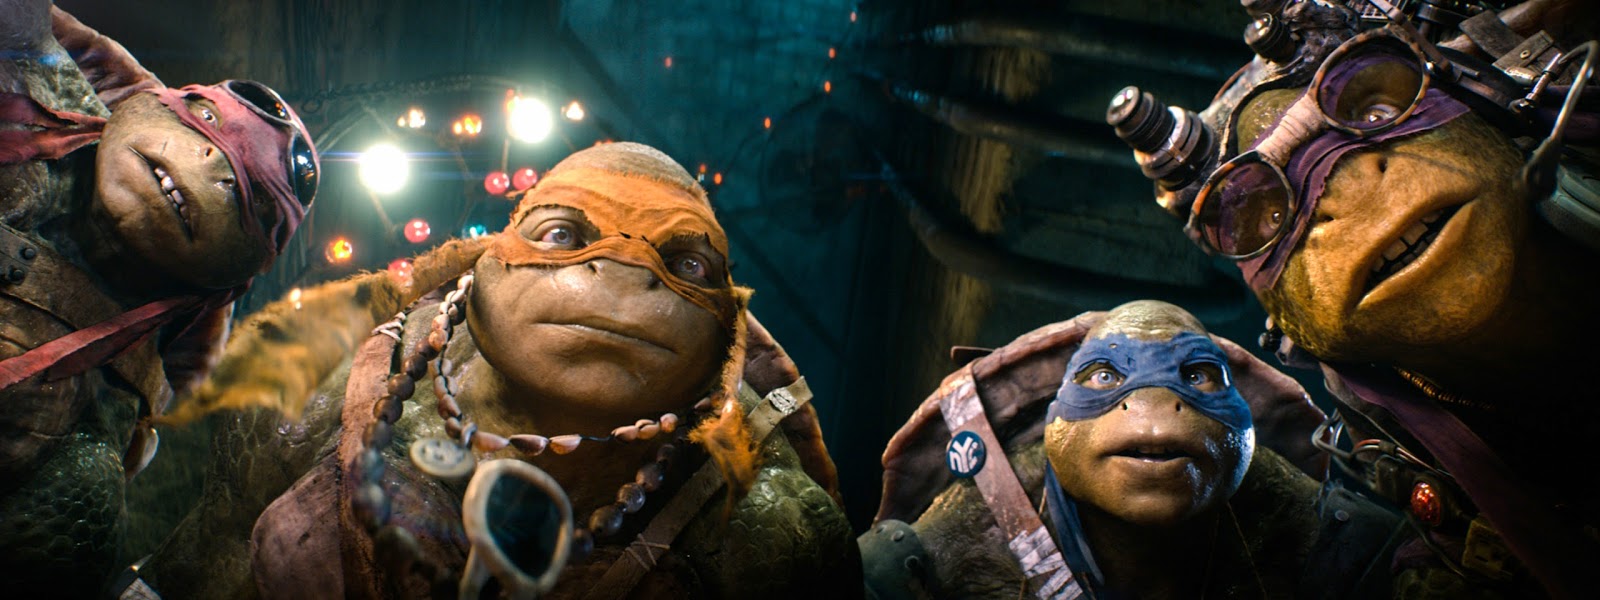 NickALive!: 'Teenage Mutant Ninja Turtles' Movie Becomes The #1 Performing  Home Entertainment Title of All 2014 Blockbusters